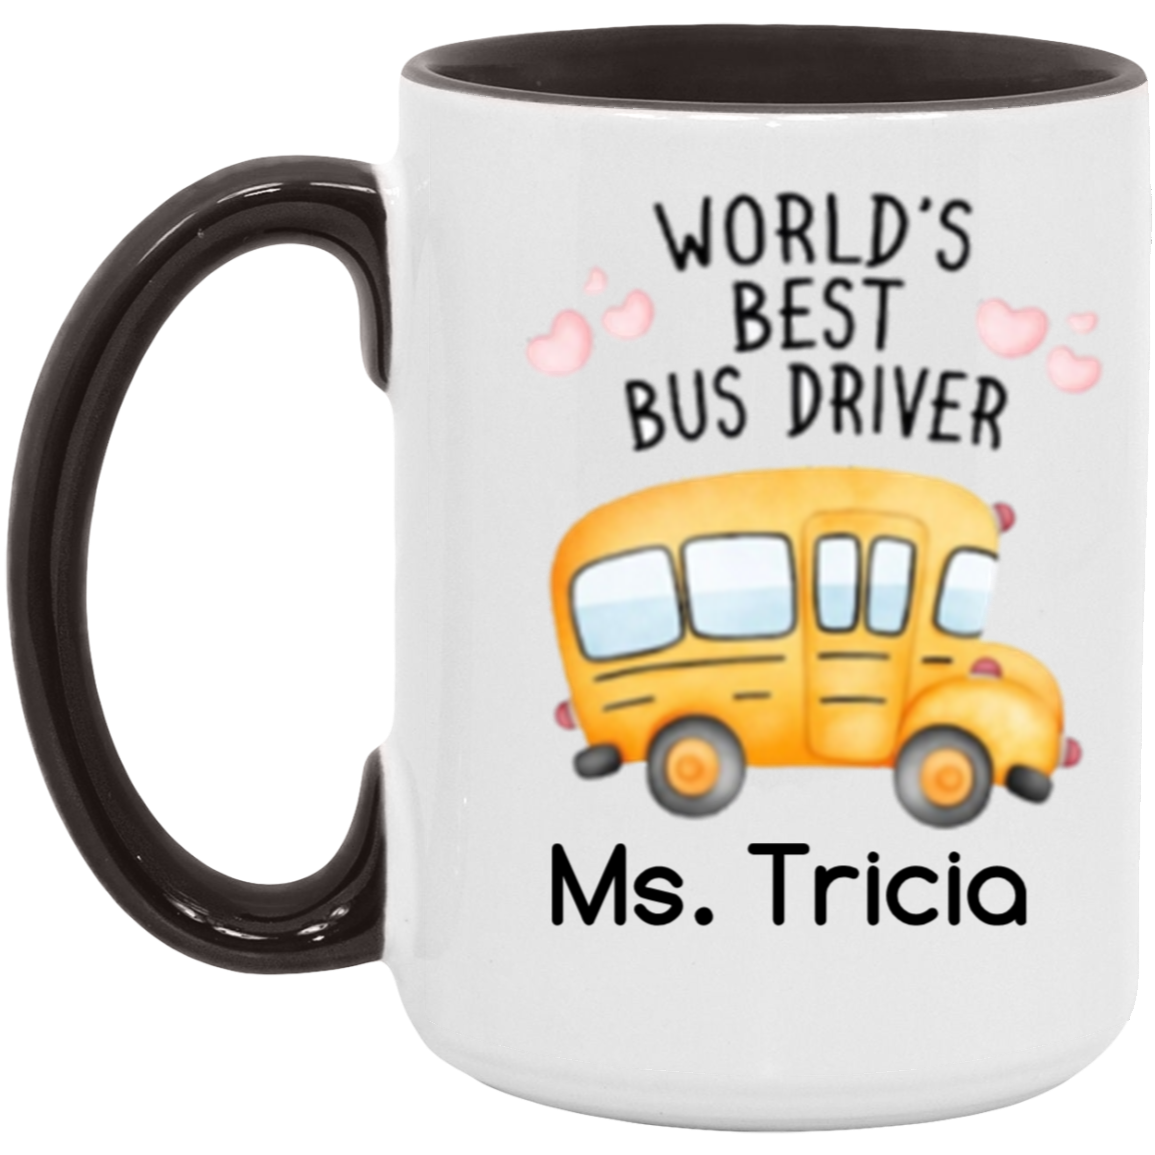 Personalized World's Best Bus Driver Mug with Color inside